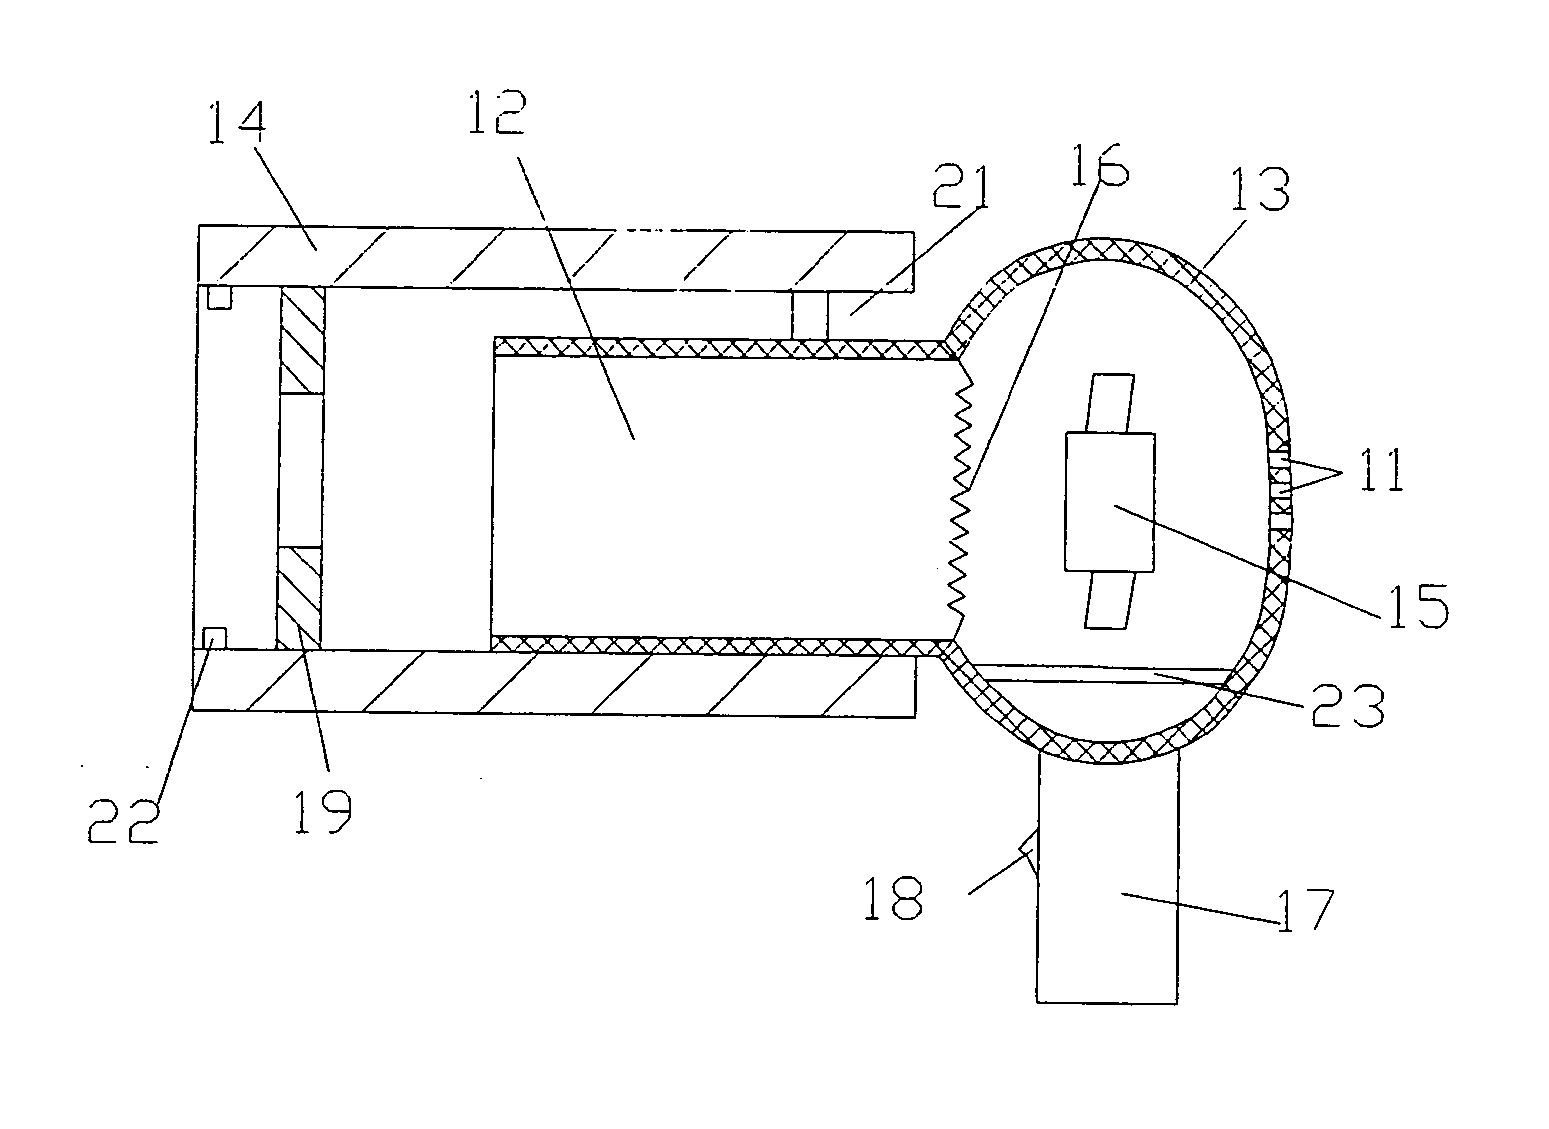 Health Care and Physical Therapy Device For Gathering Energy